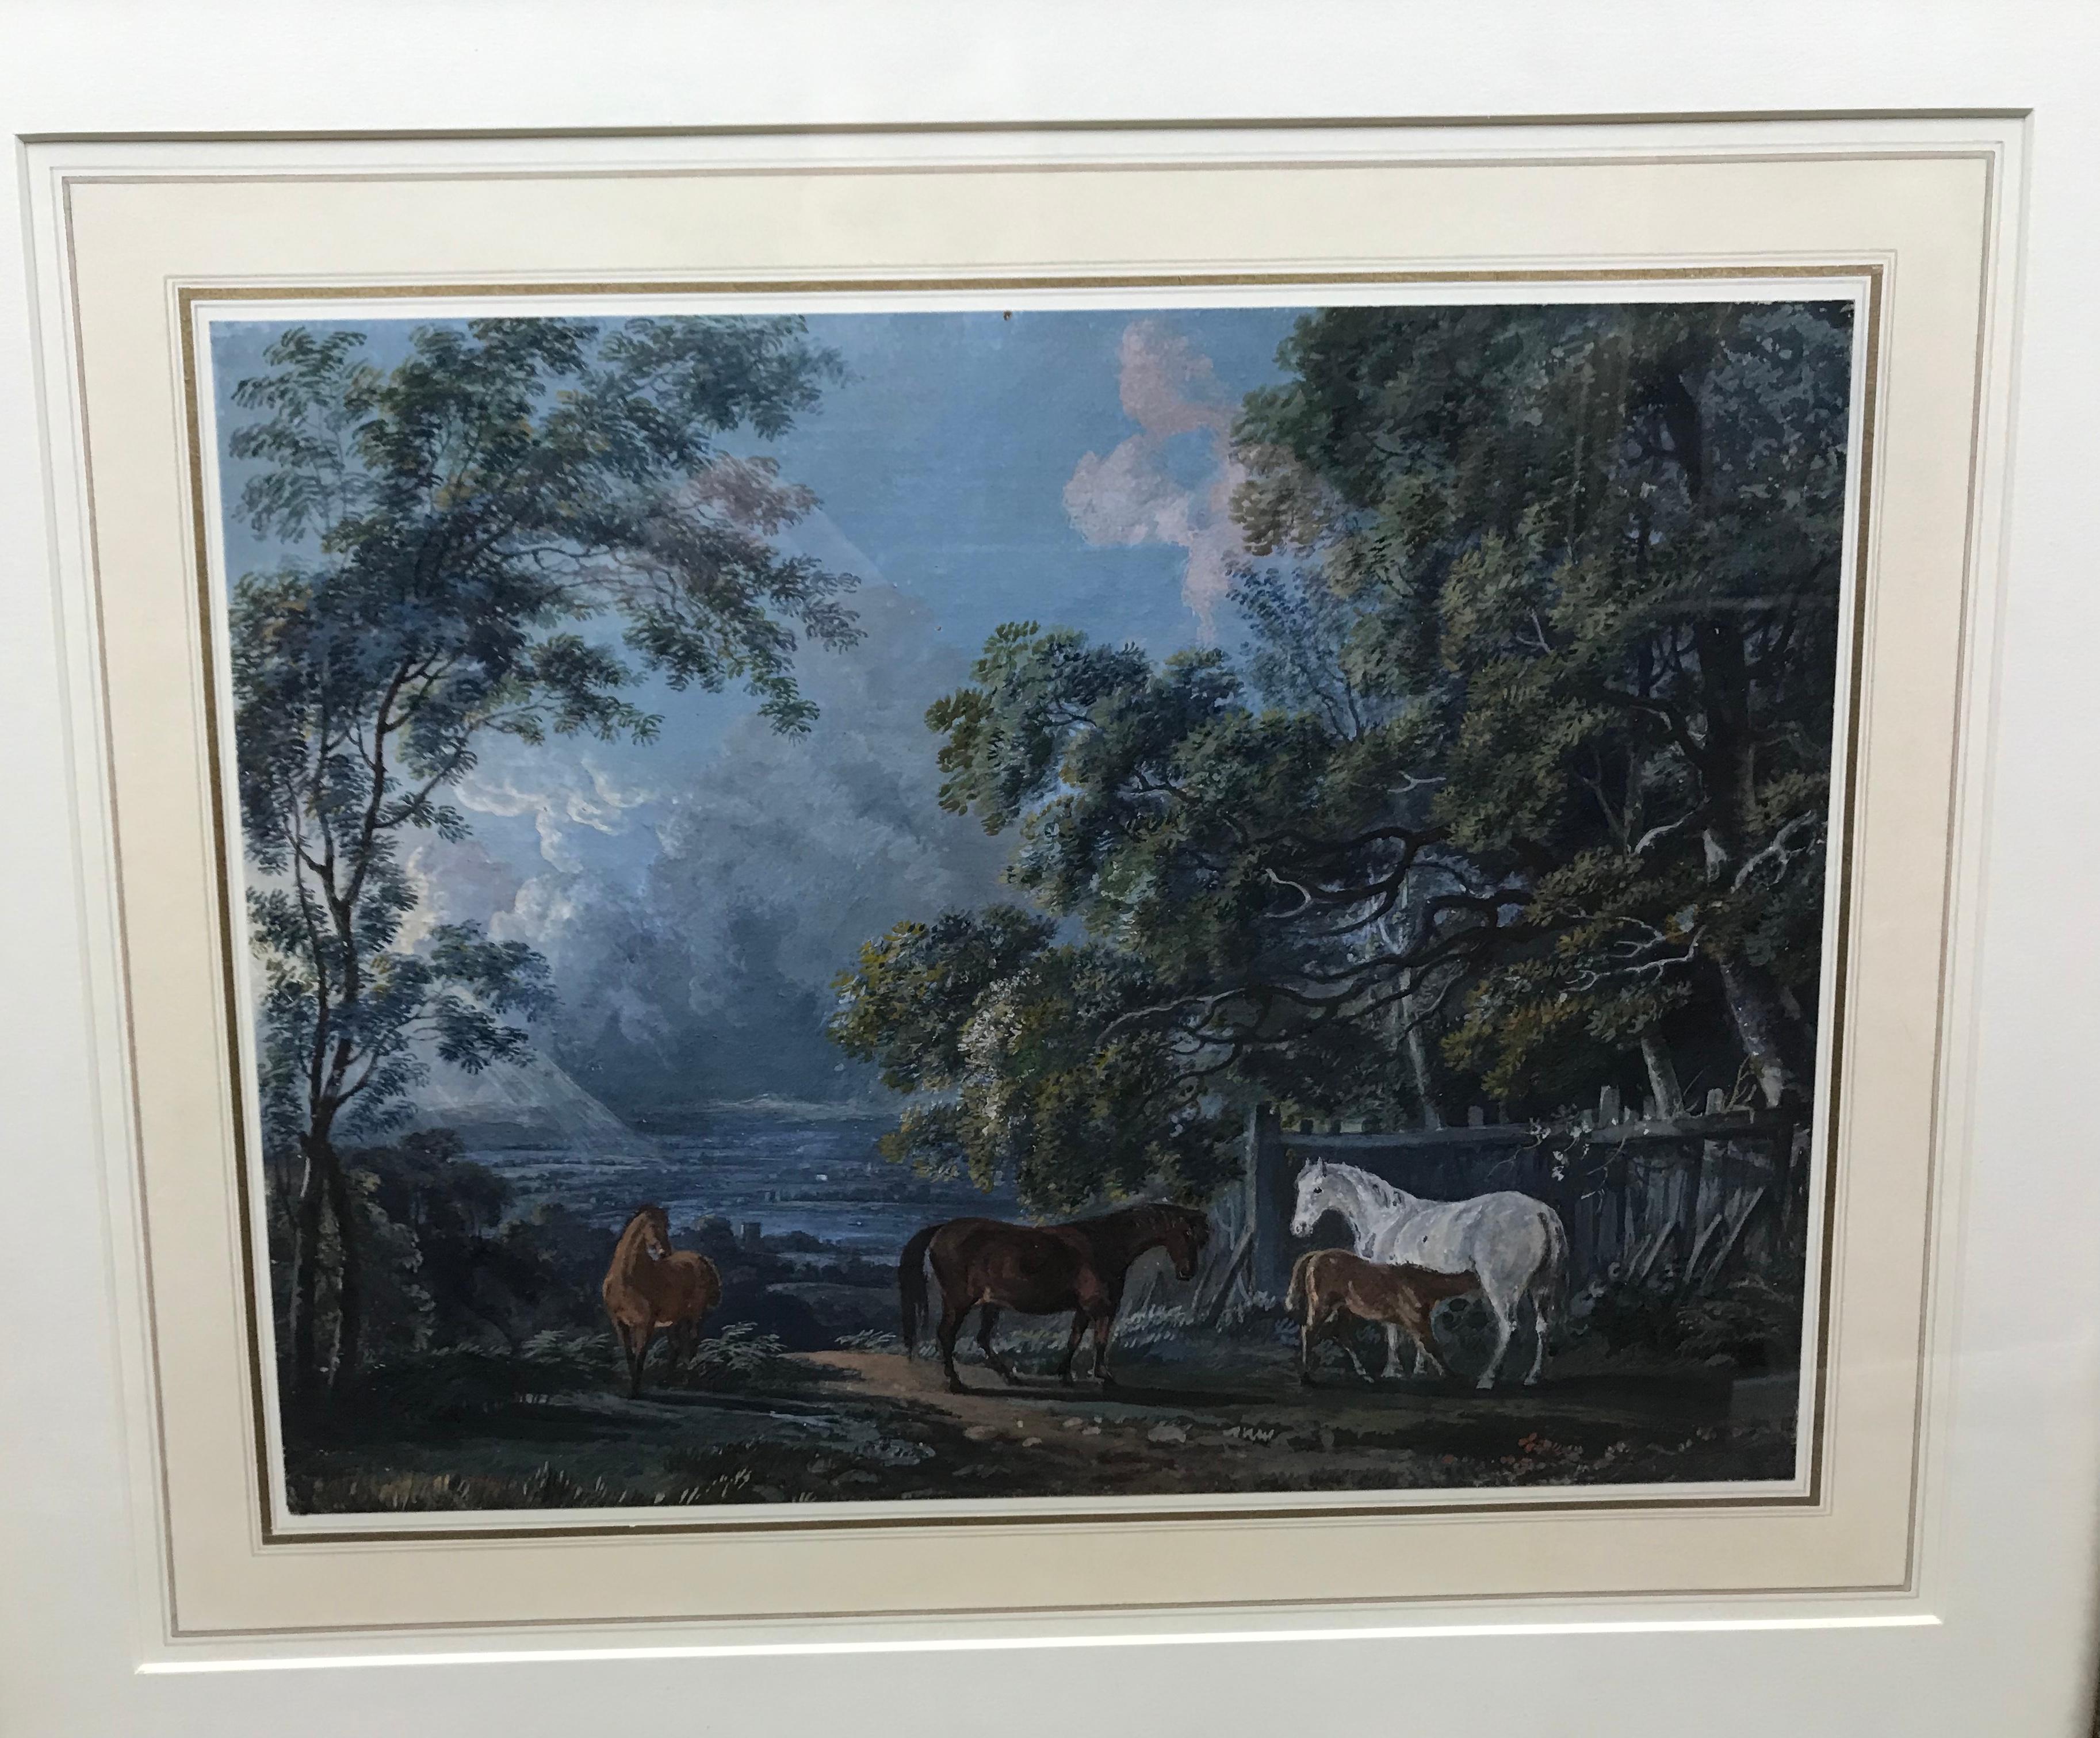 Mares and foals in a landscape - Horses - Gray Animal Art by George Barret 